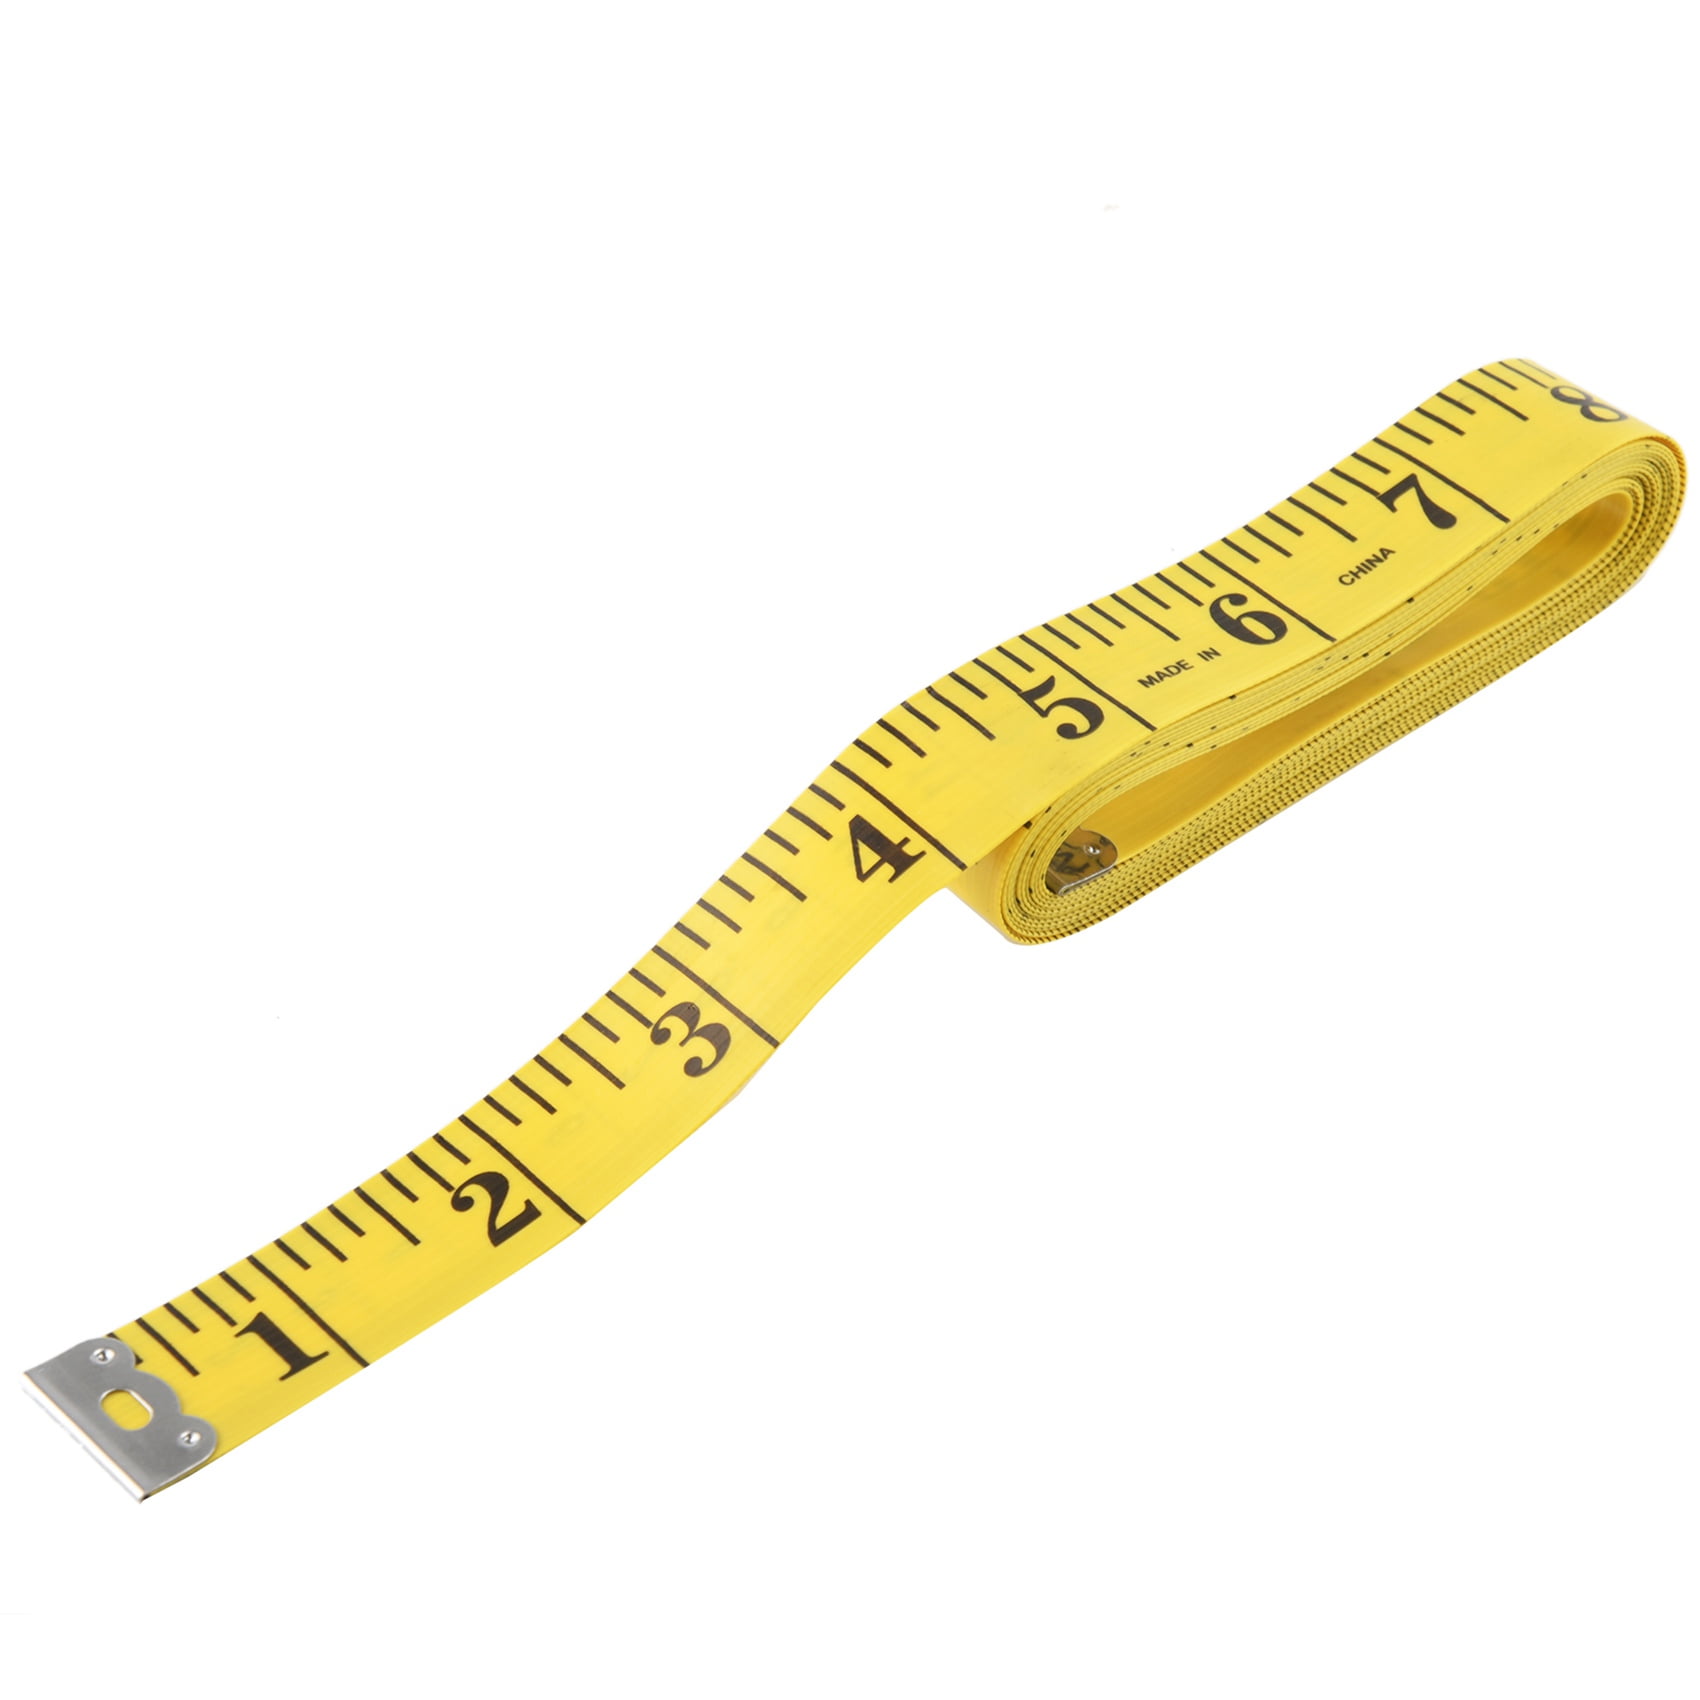 Soft 3m 300cm sewing tailor's tape body measuring ruler tailor's soft tape  measuring tape